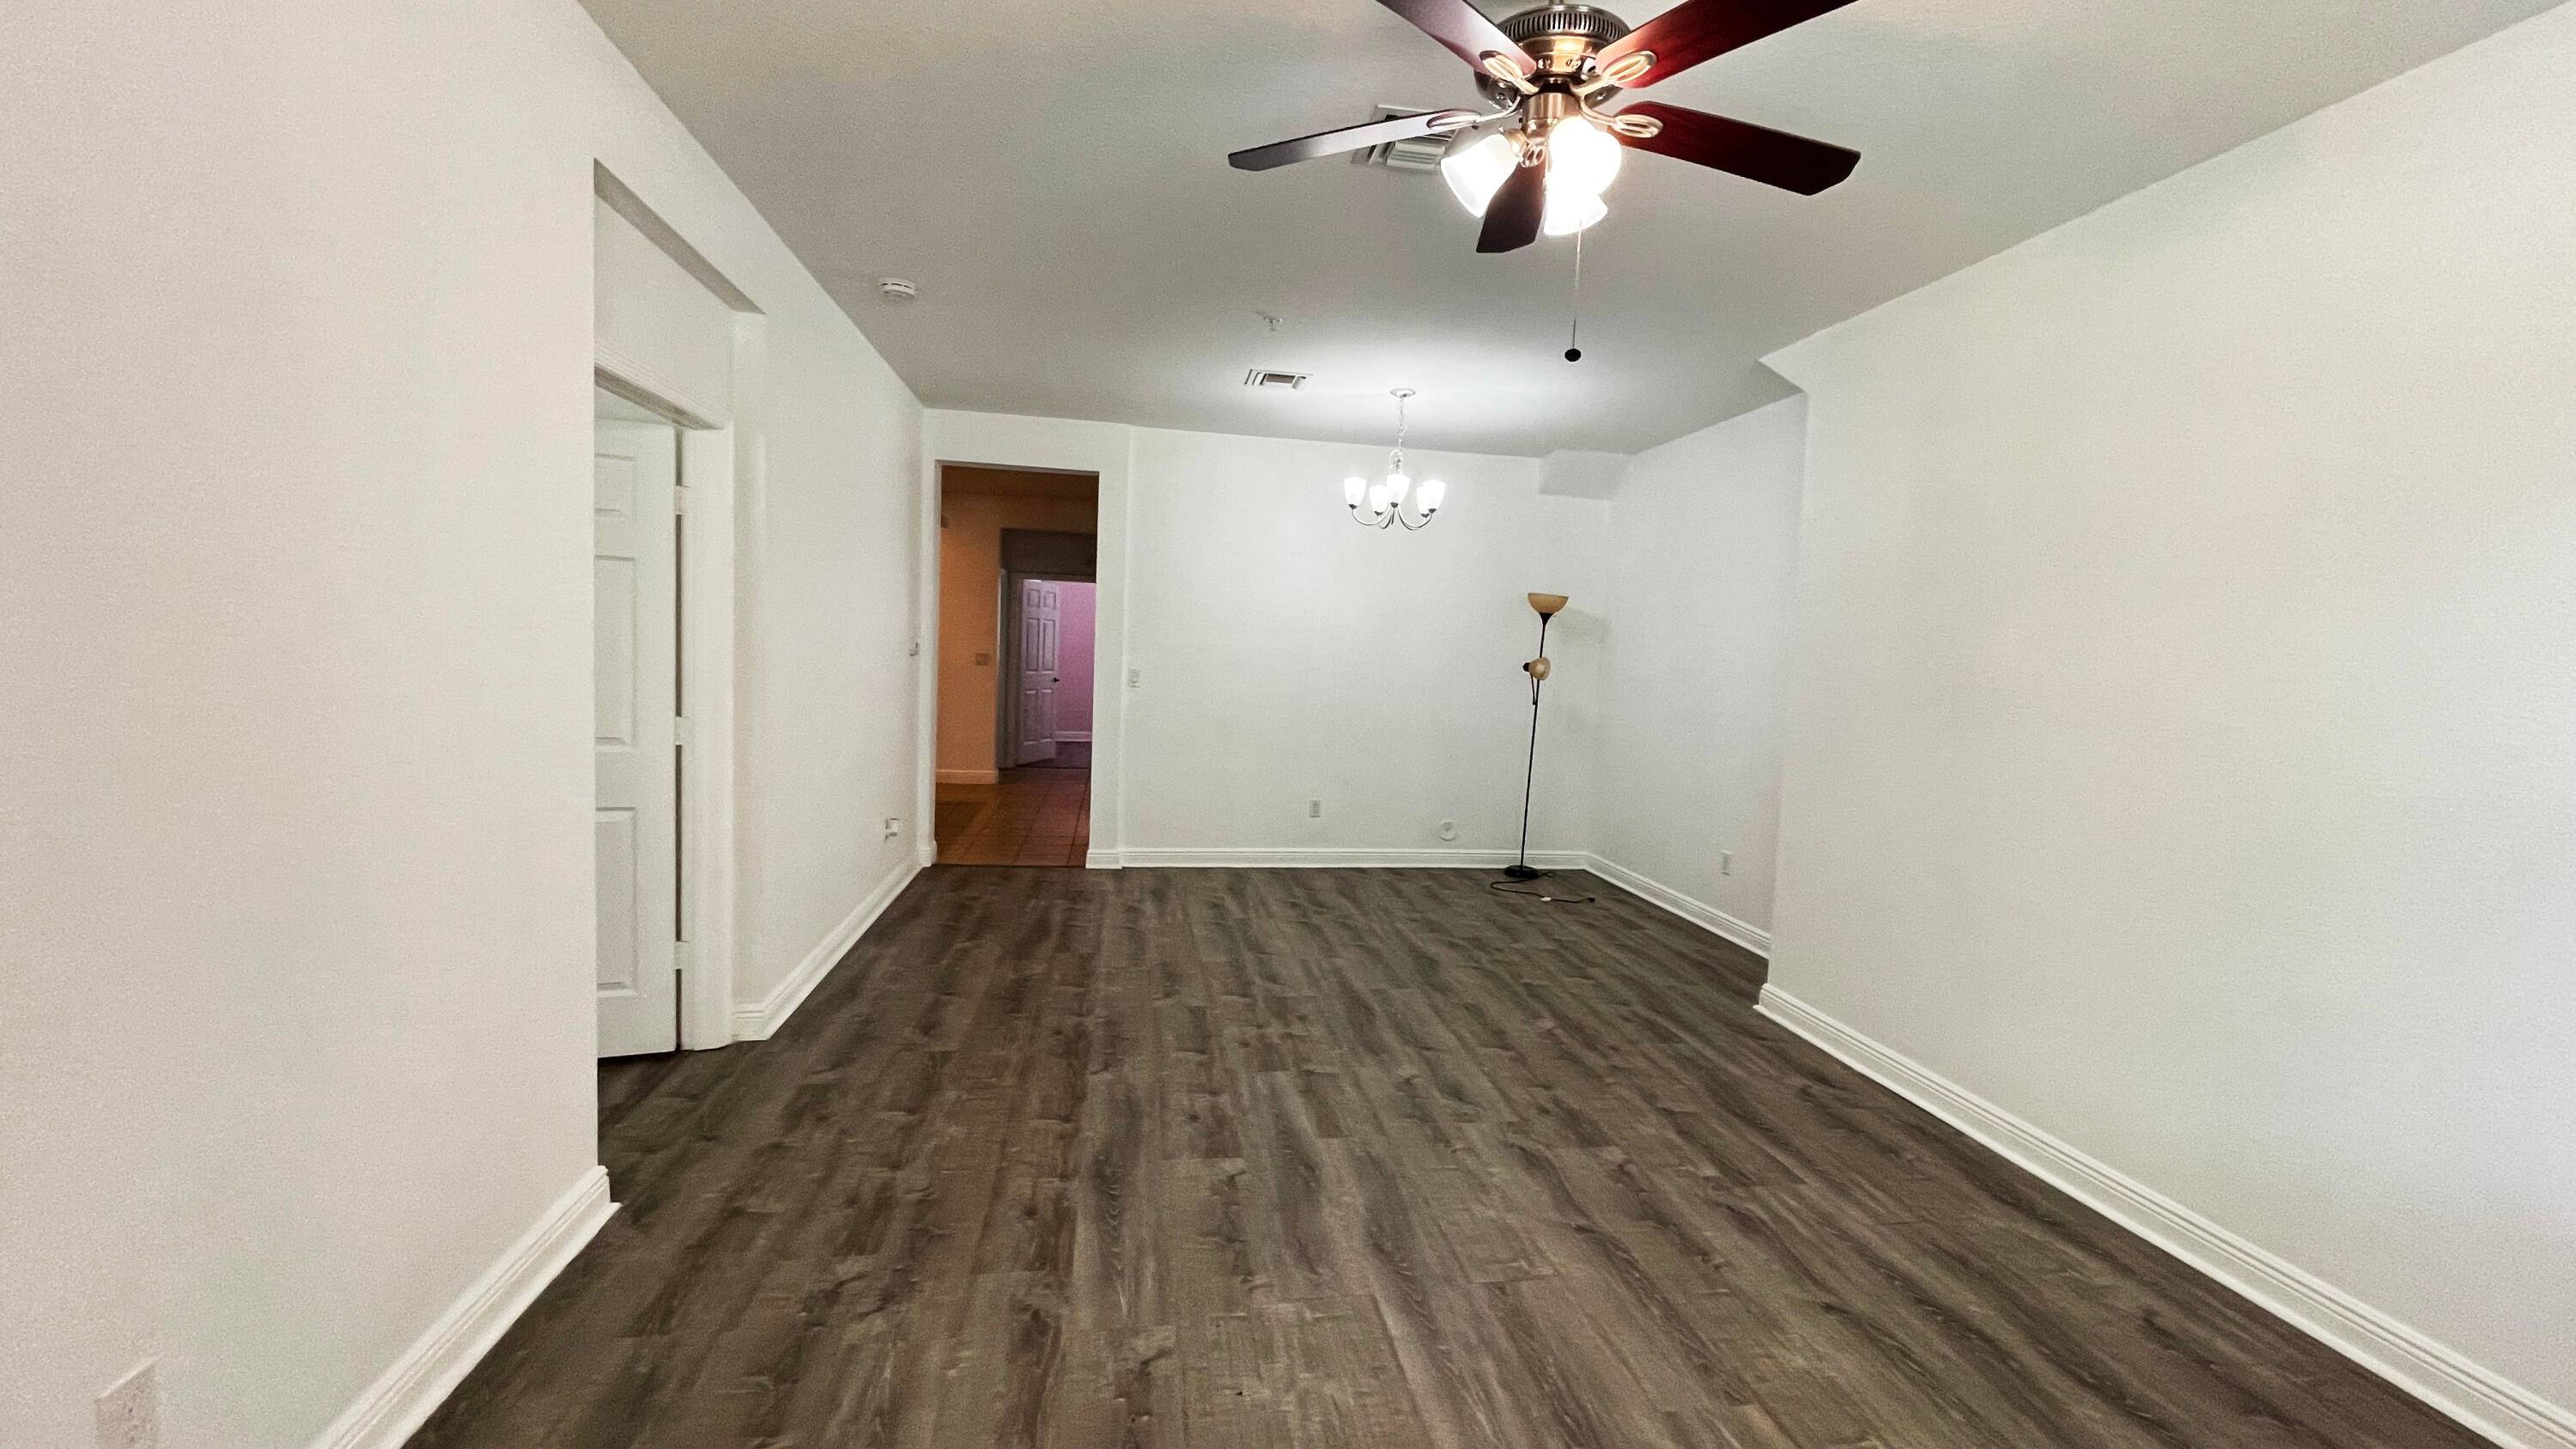 Beautiful 3 Bed 2 Bath Condo with attached Garage in a very calm area of Pembroke Pines.